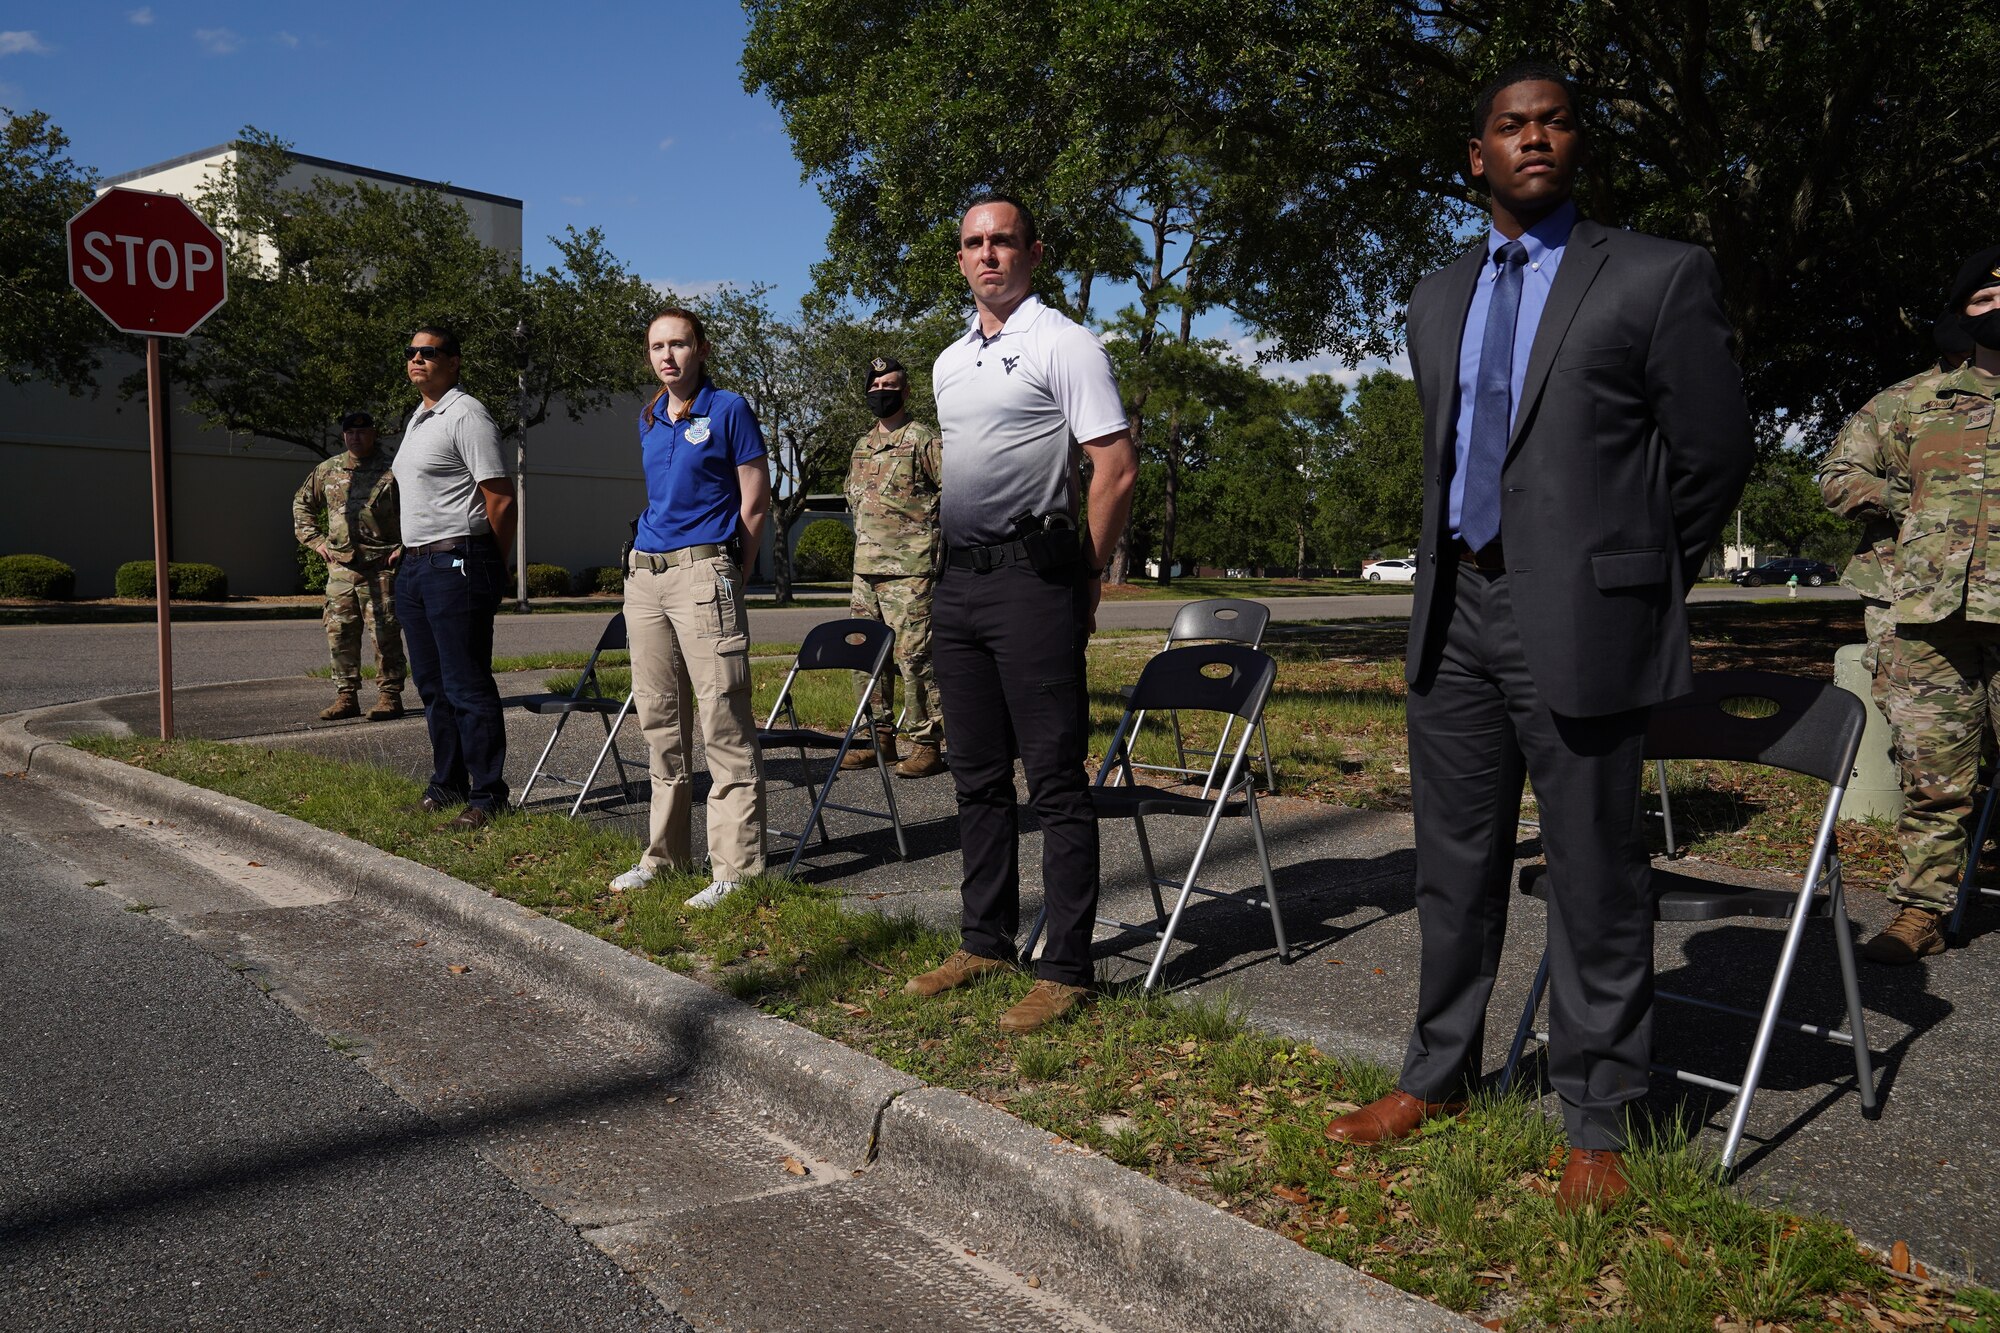 Members from the Air Force Office of Special Investigations Detachment 407 stand during the Police Week retreat ceremony at Keesler Air Force Base, Mississippi, May 14, 2021. The event was held during National Police Week, recognizing the men and women in law enforcement. (U.S. Air Force photo by Senior Airman Spencer Tobler)